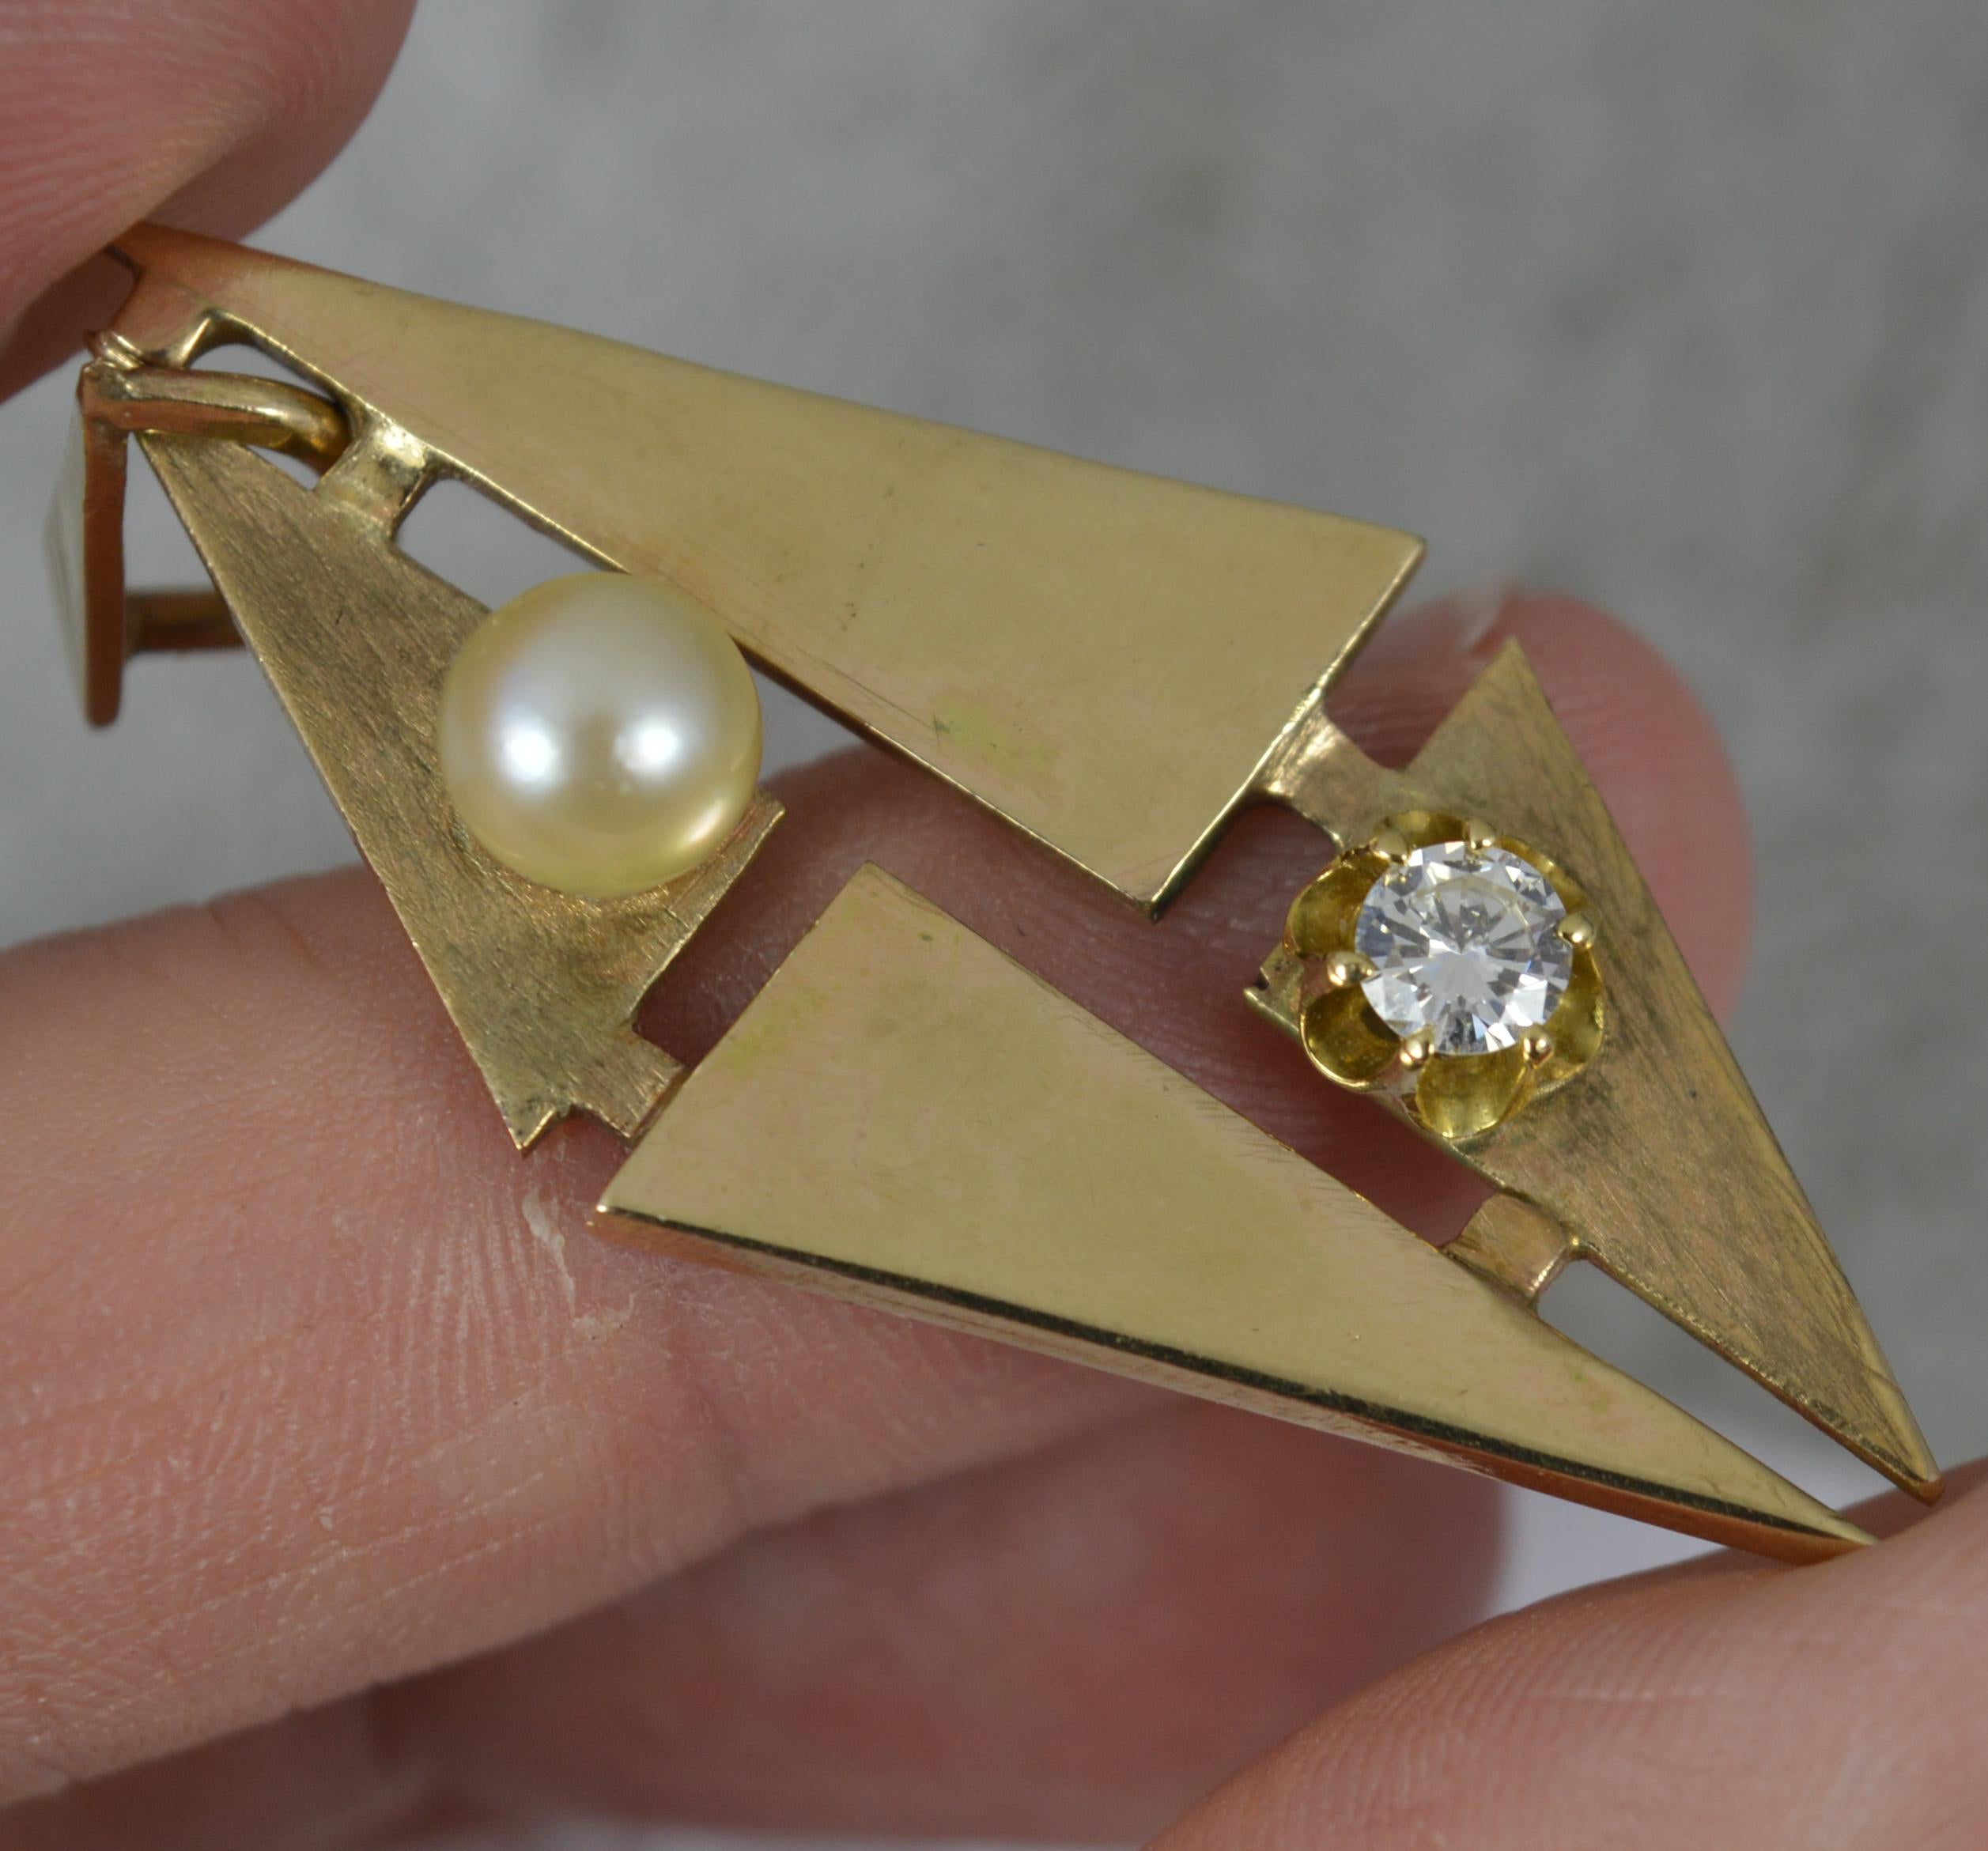 Stylish Retro 9 Carat Gold Vs Diamond and Pearl Pendant In Excellent Condition For Sale In St Helens, GB